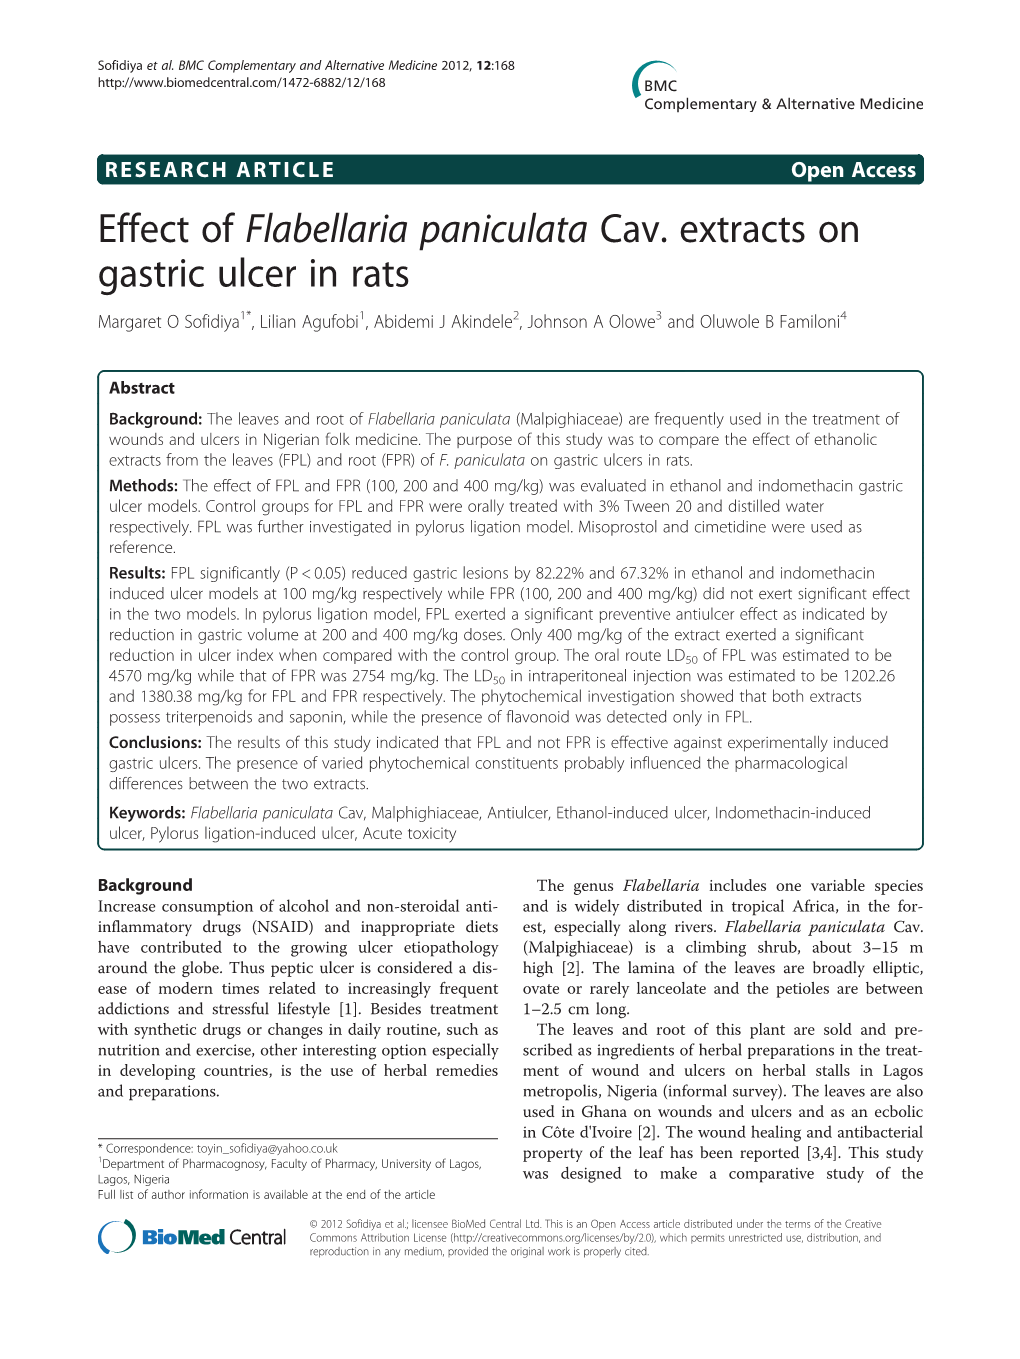 Effect of Flabellaria Paniculata Cav. Extracts On